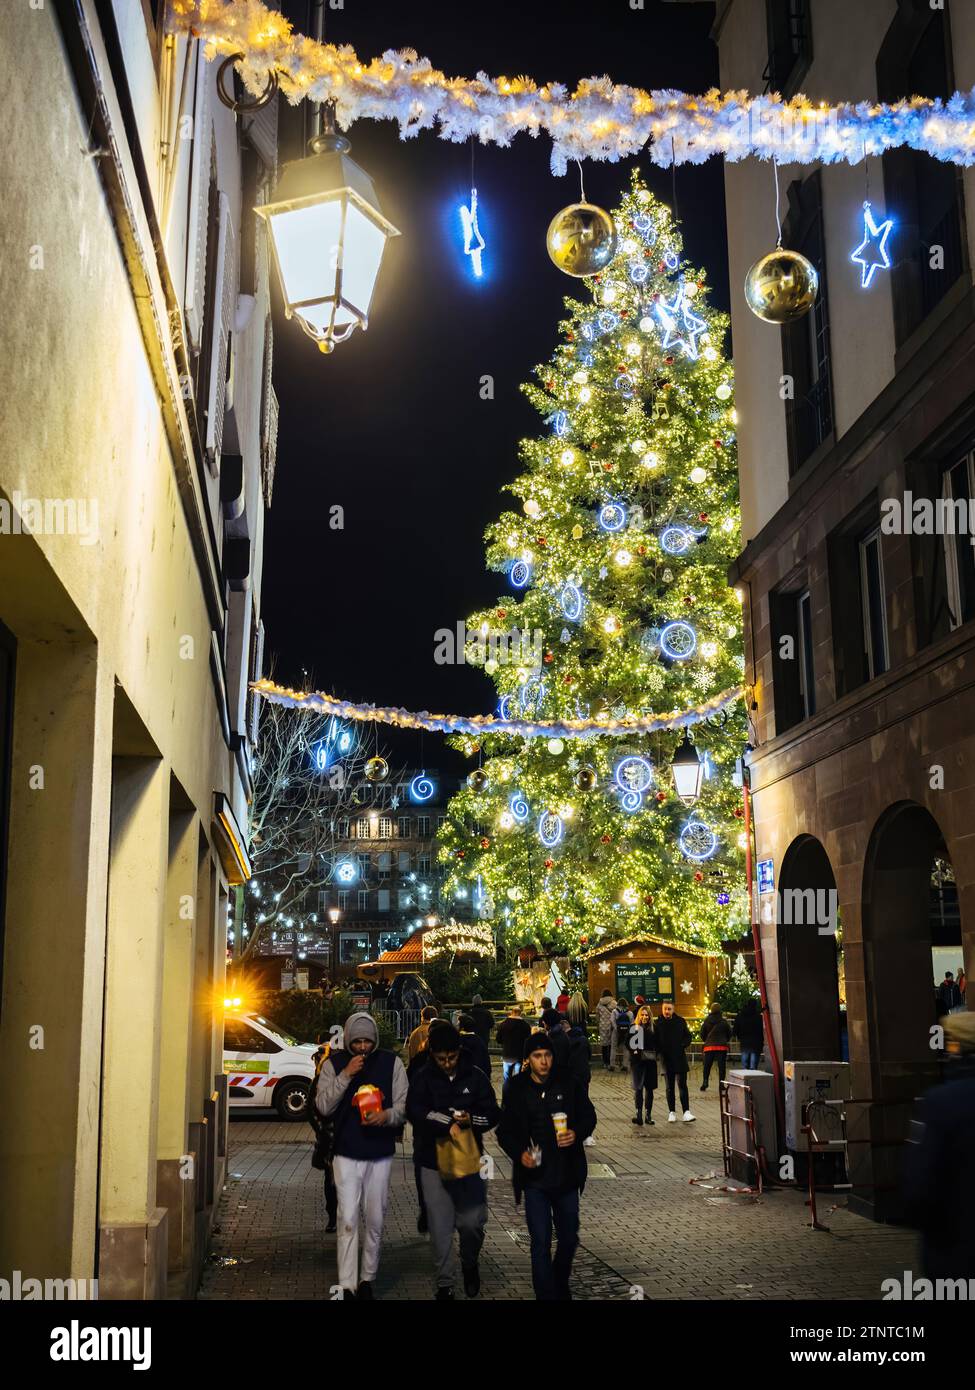 Strasbourg, France - Nov 25, 2022: Experience the magic of the holidays with a low-angle view of a towering Christmas tree in central Place Kleber, fr Stock Photo